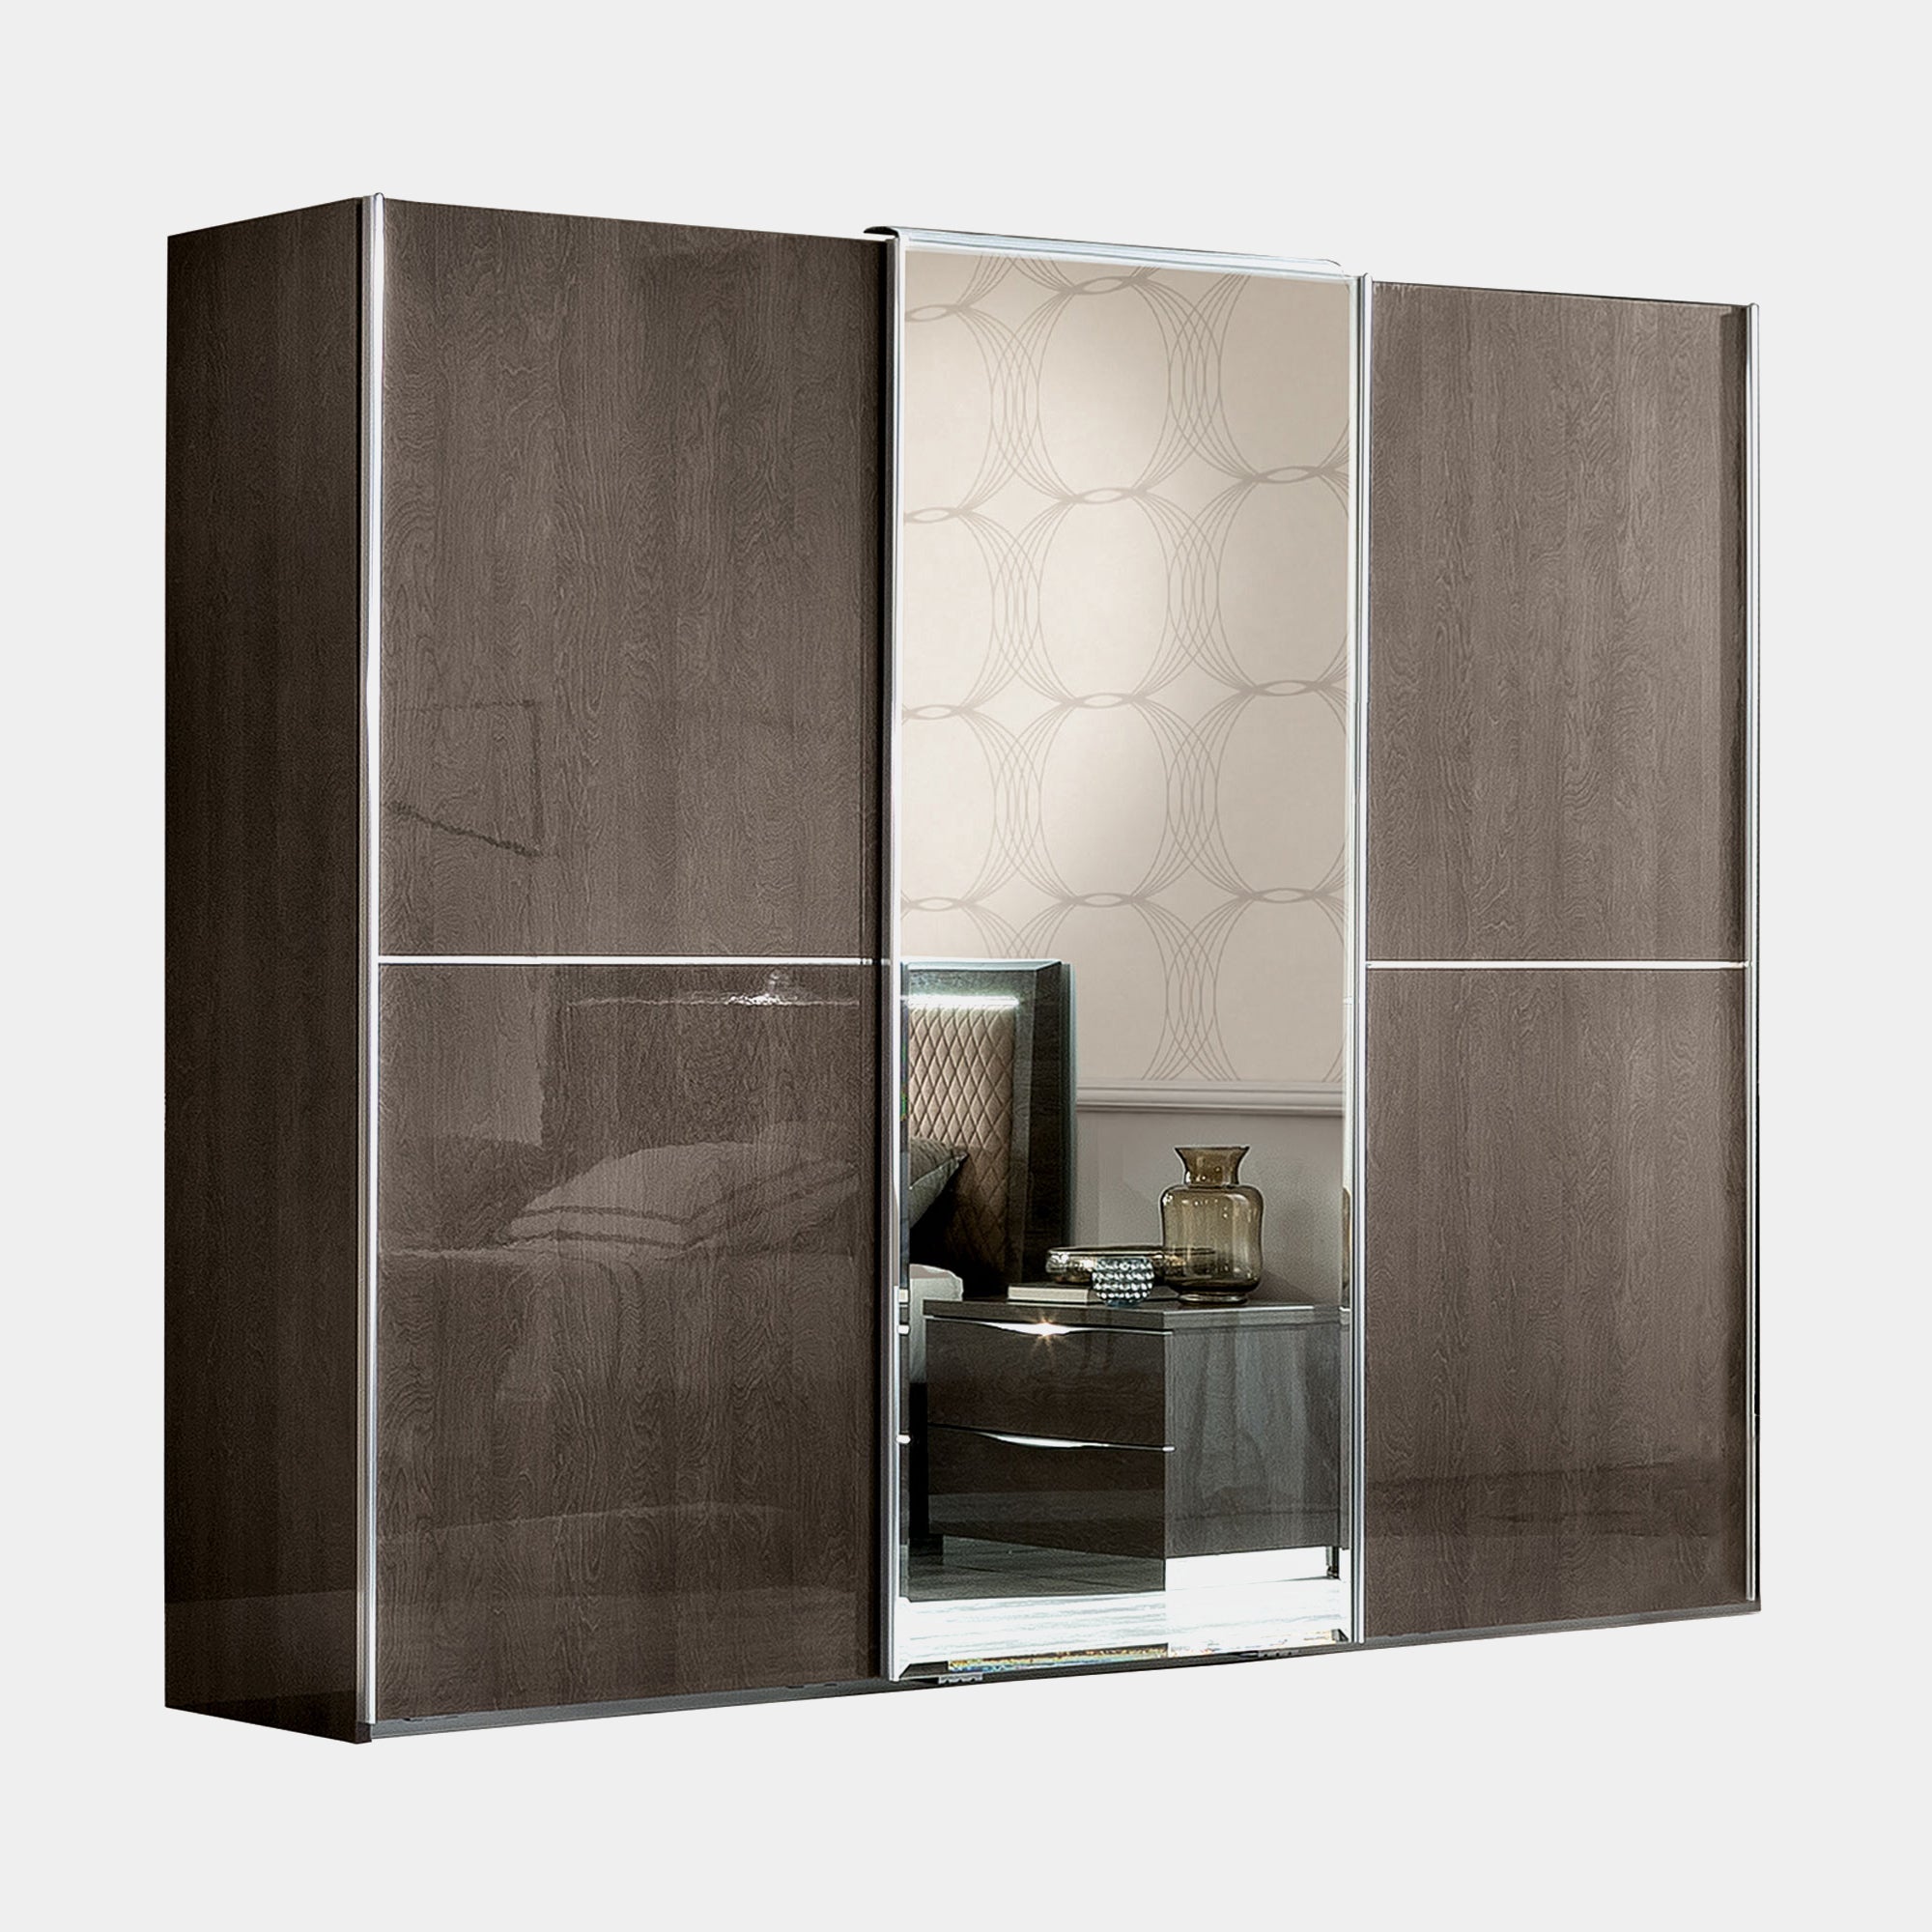 Wardrobe 3 Door Sliding with 1 Mirrored Door Silver Grey (Self Assembly Required)